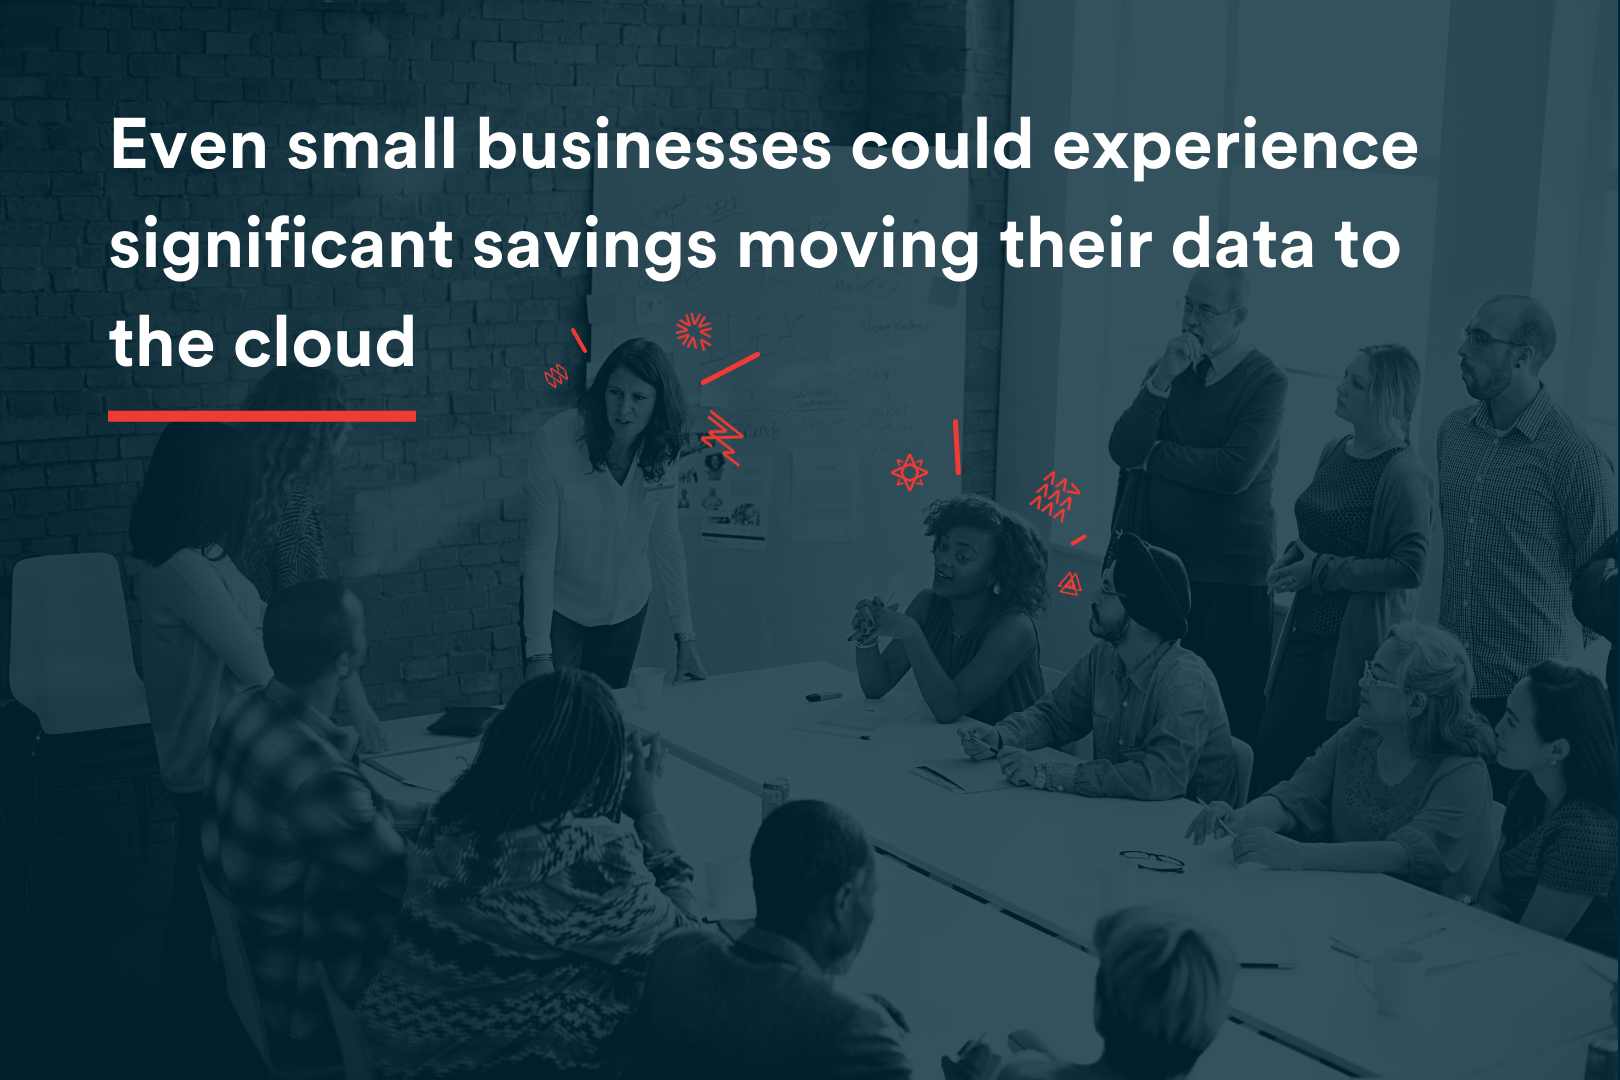 Blog Image - Even small businesses could experience significant savings moving their data to the cloud